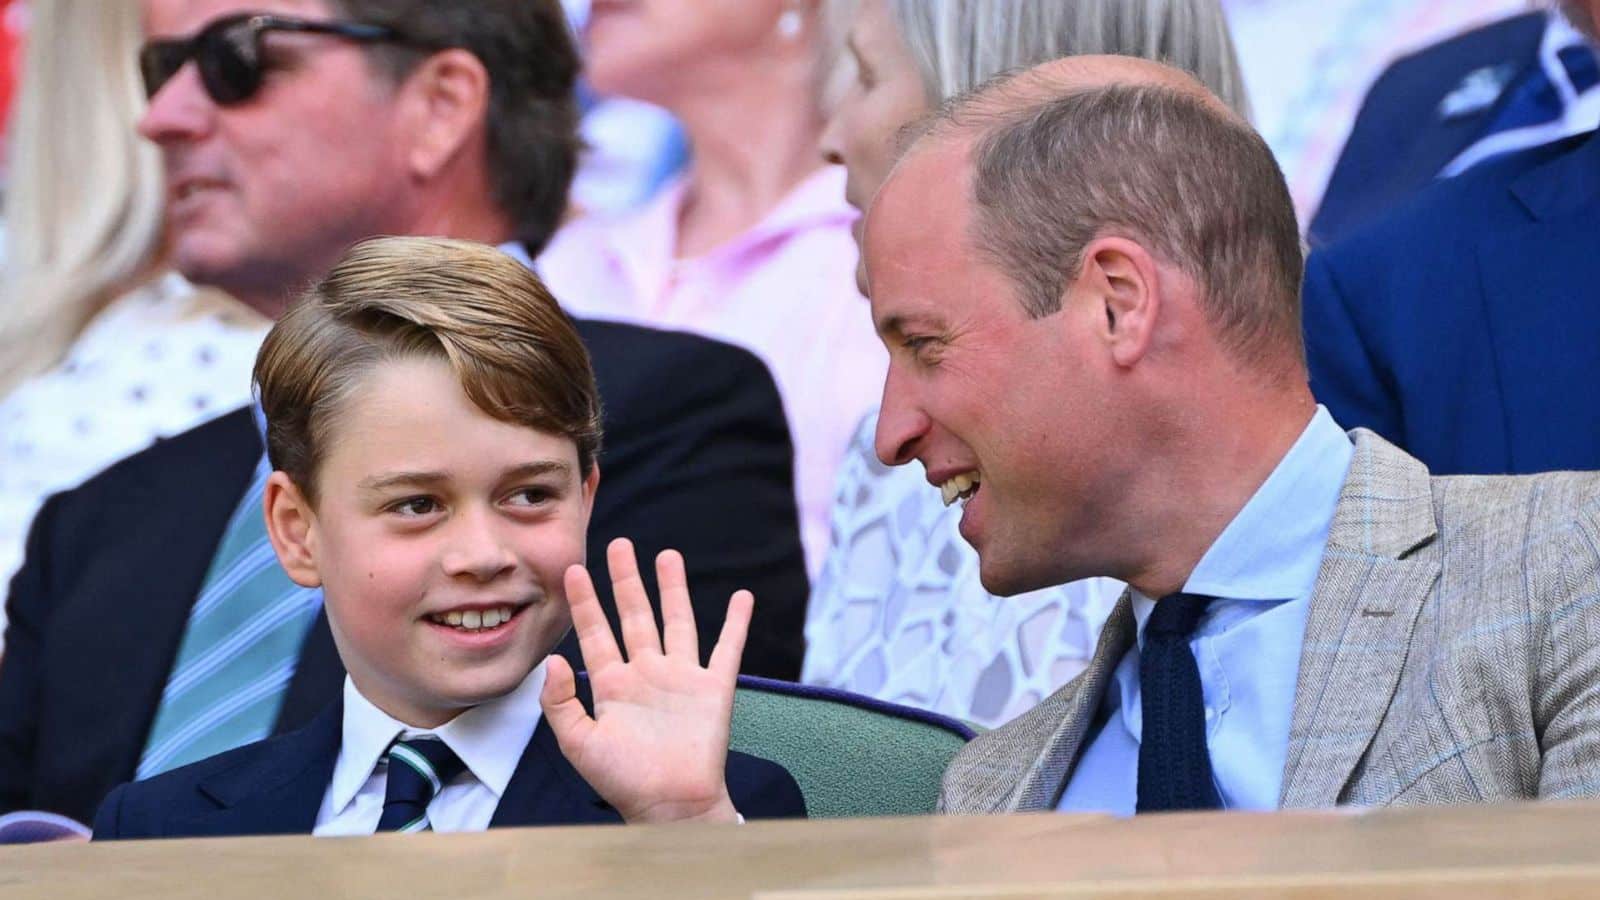 Prince George warns his classmates to ‘watch out’ because his dad Prince William will be king one day